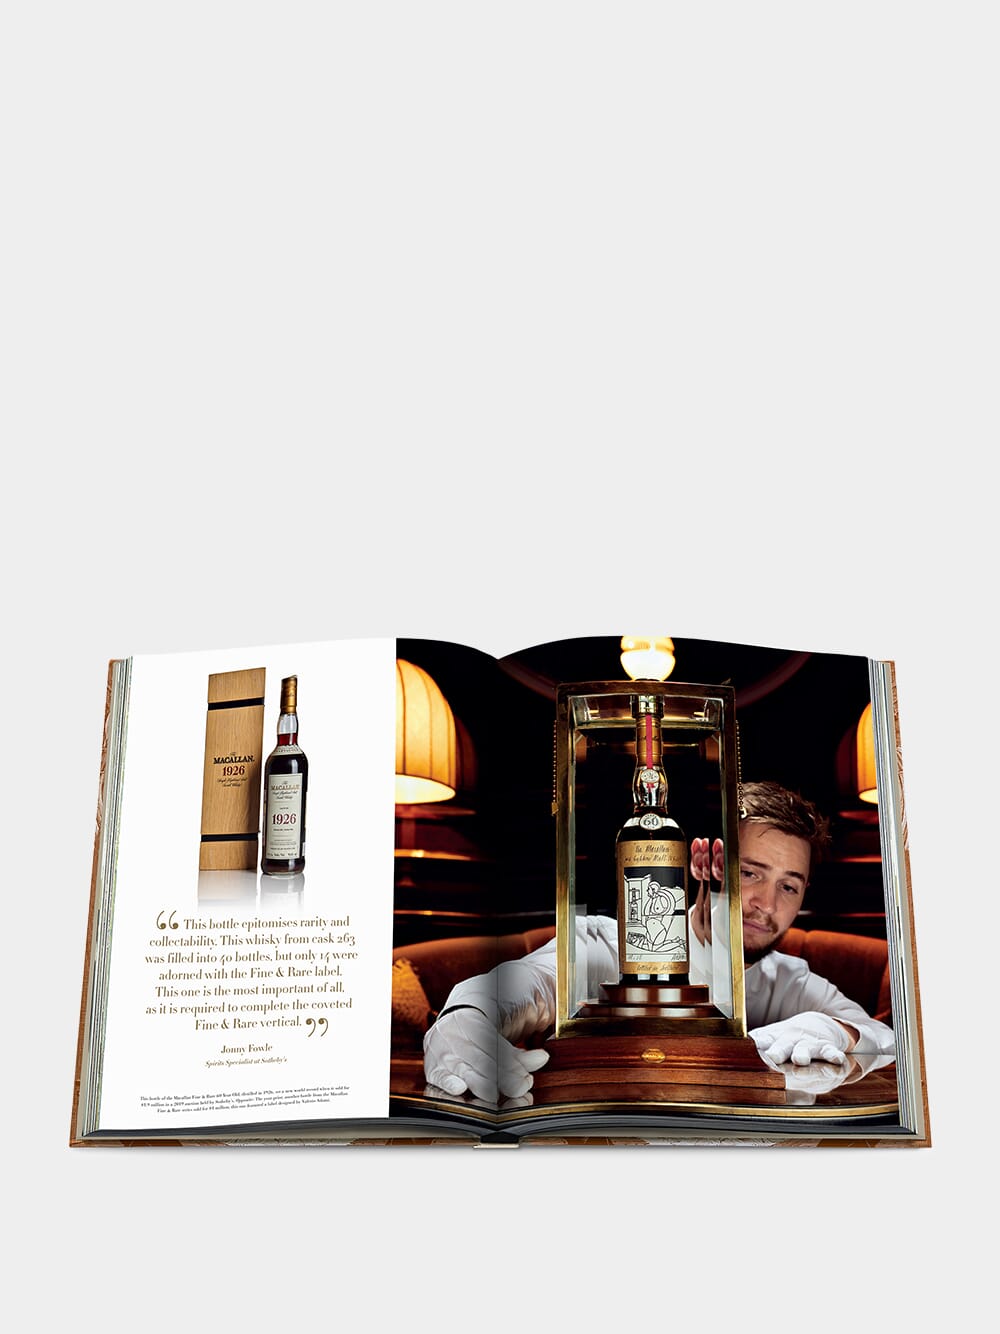 The Impossible Collection Of Whiskey